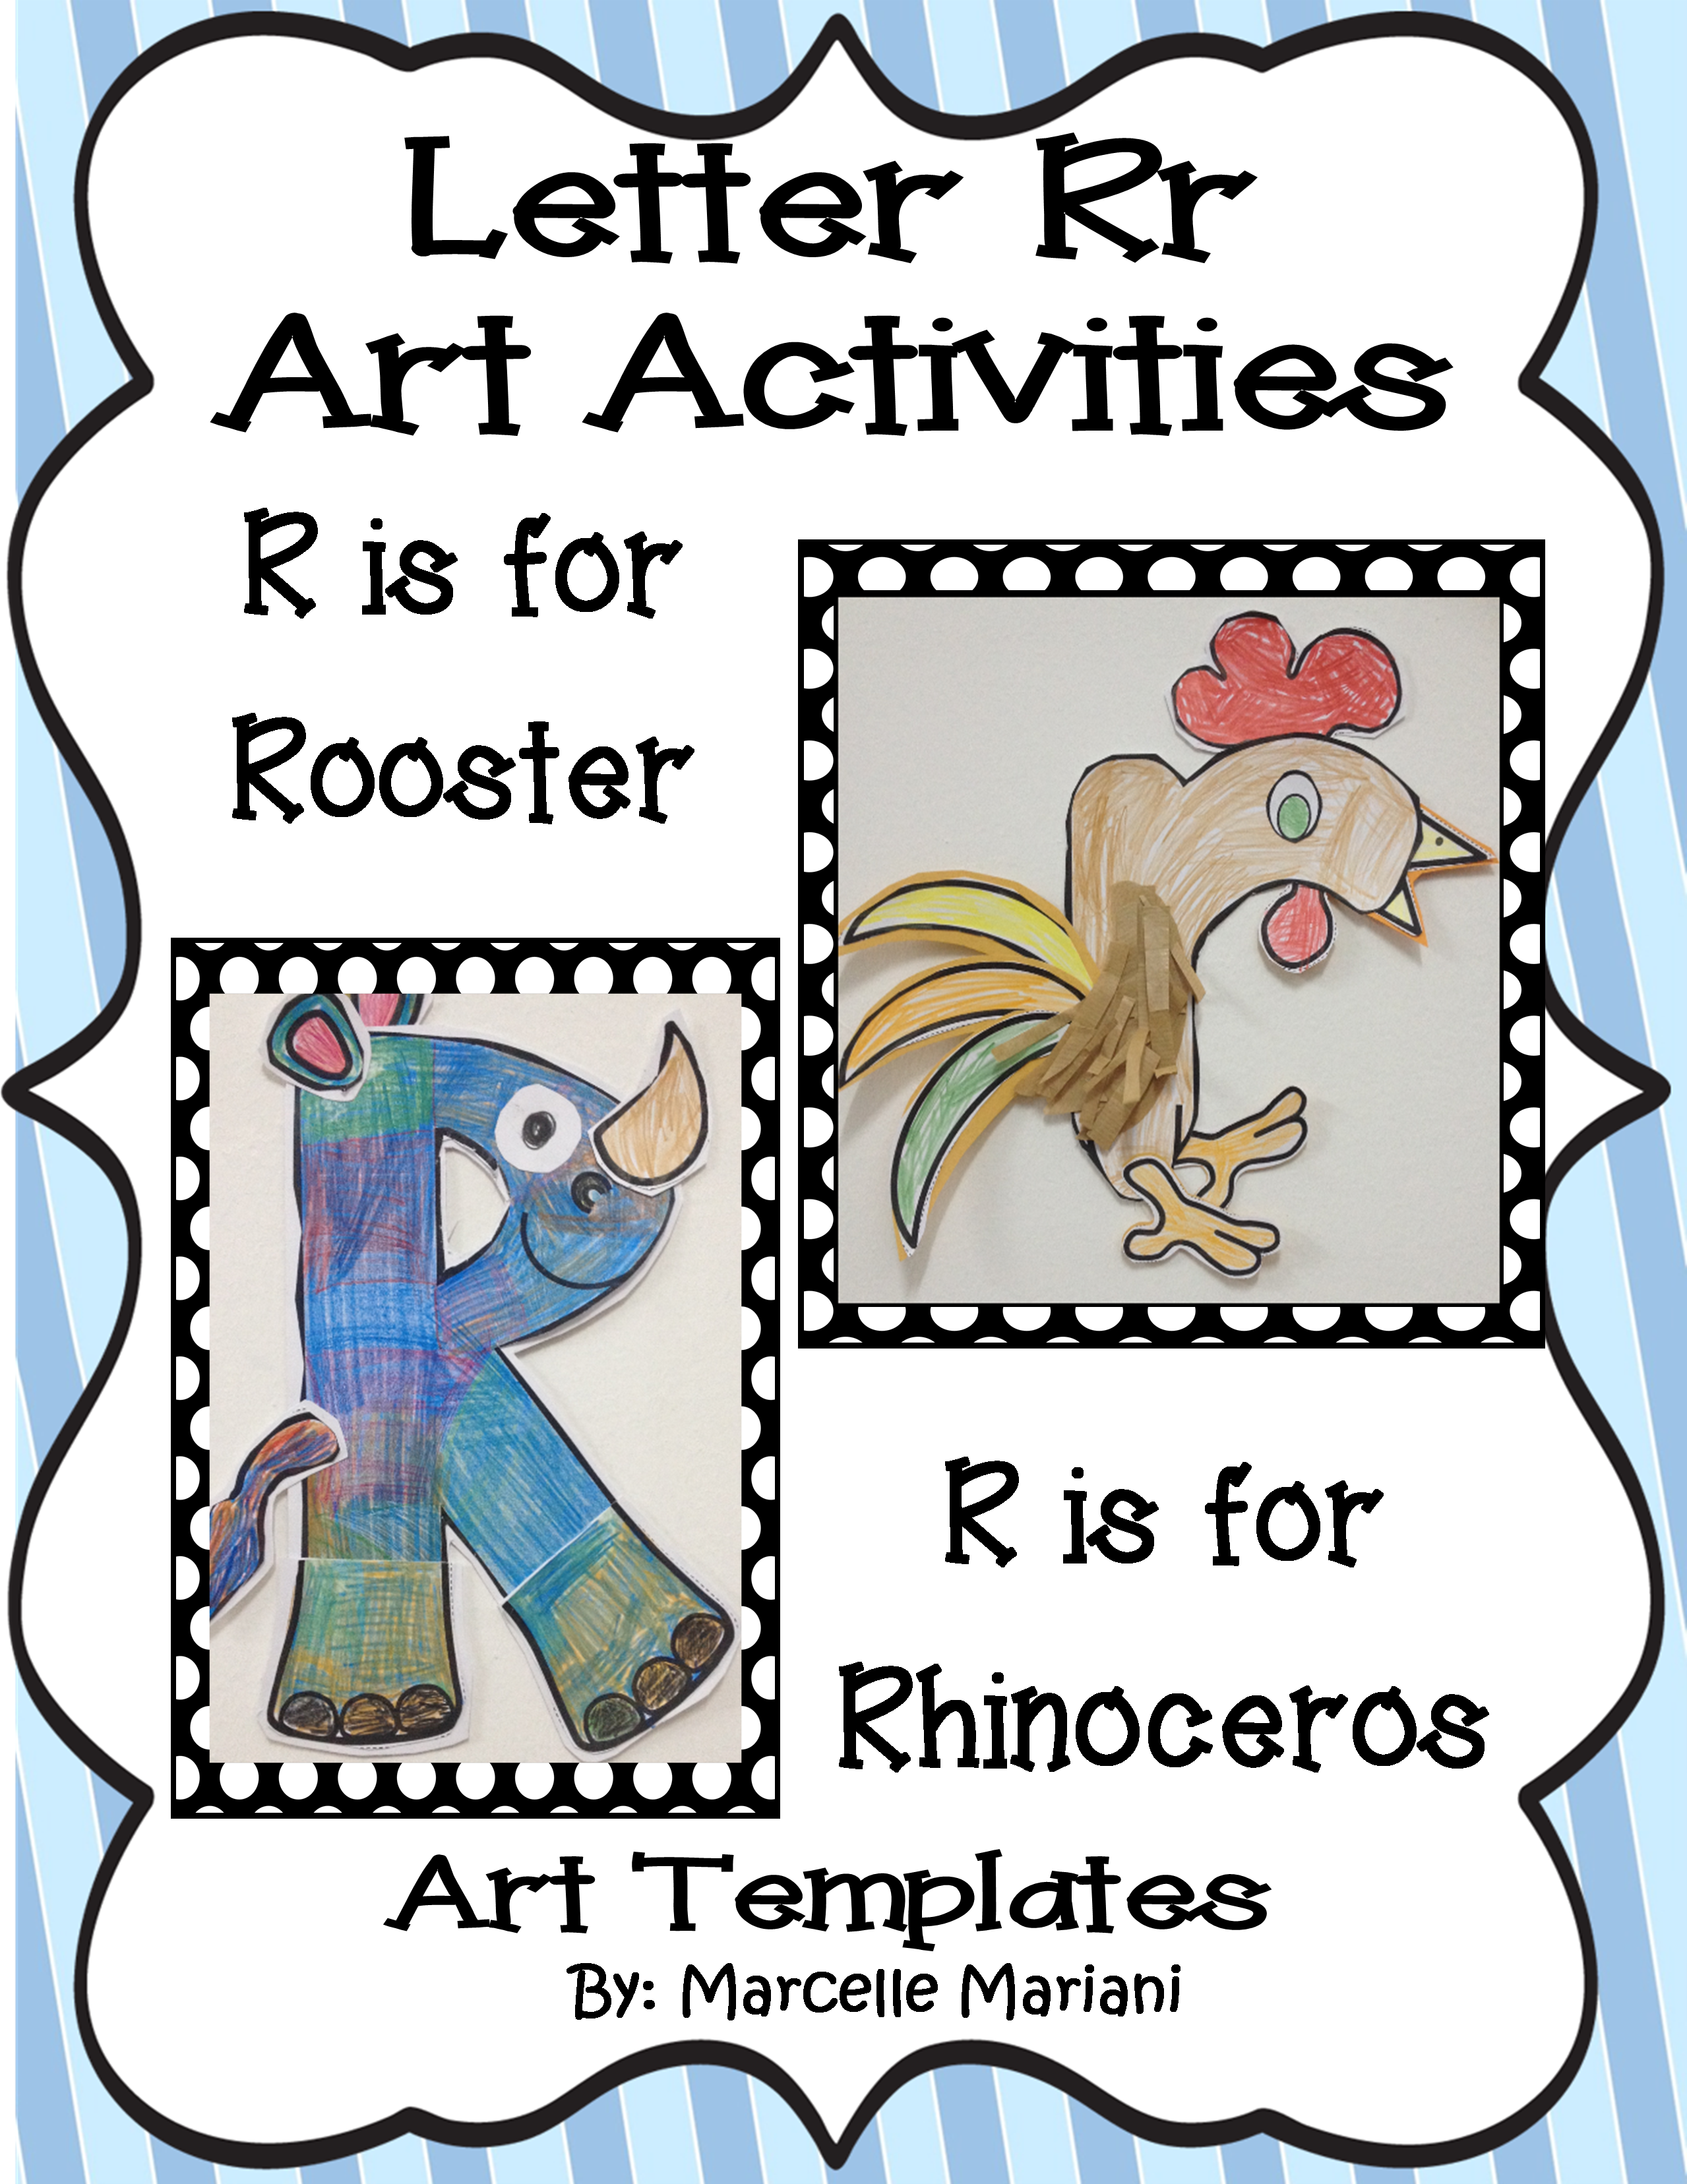 Letter of the week-Letter R-Art Activity Templates- A letter R Craftivity